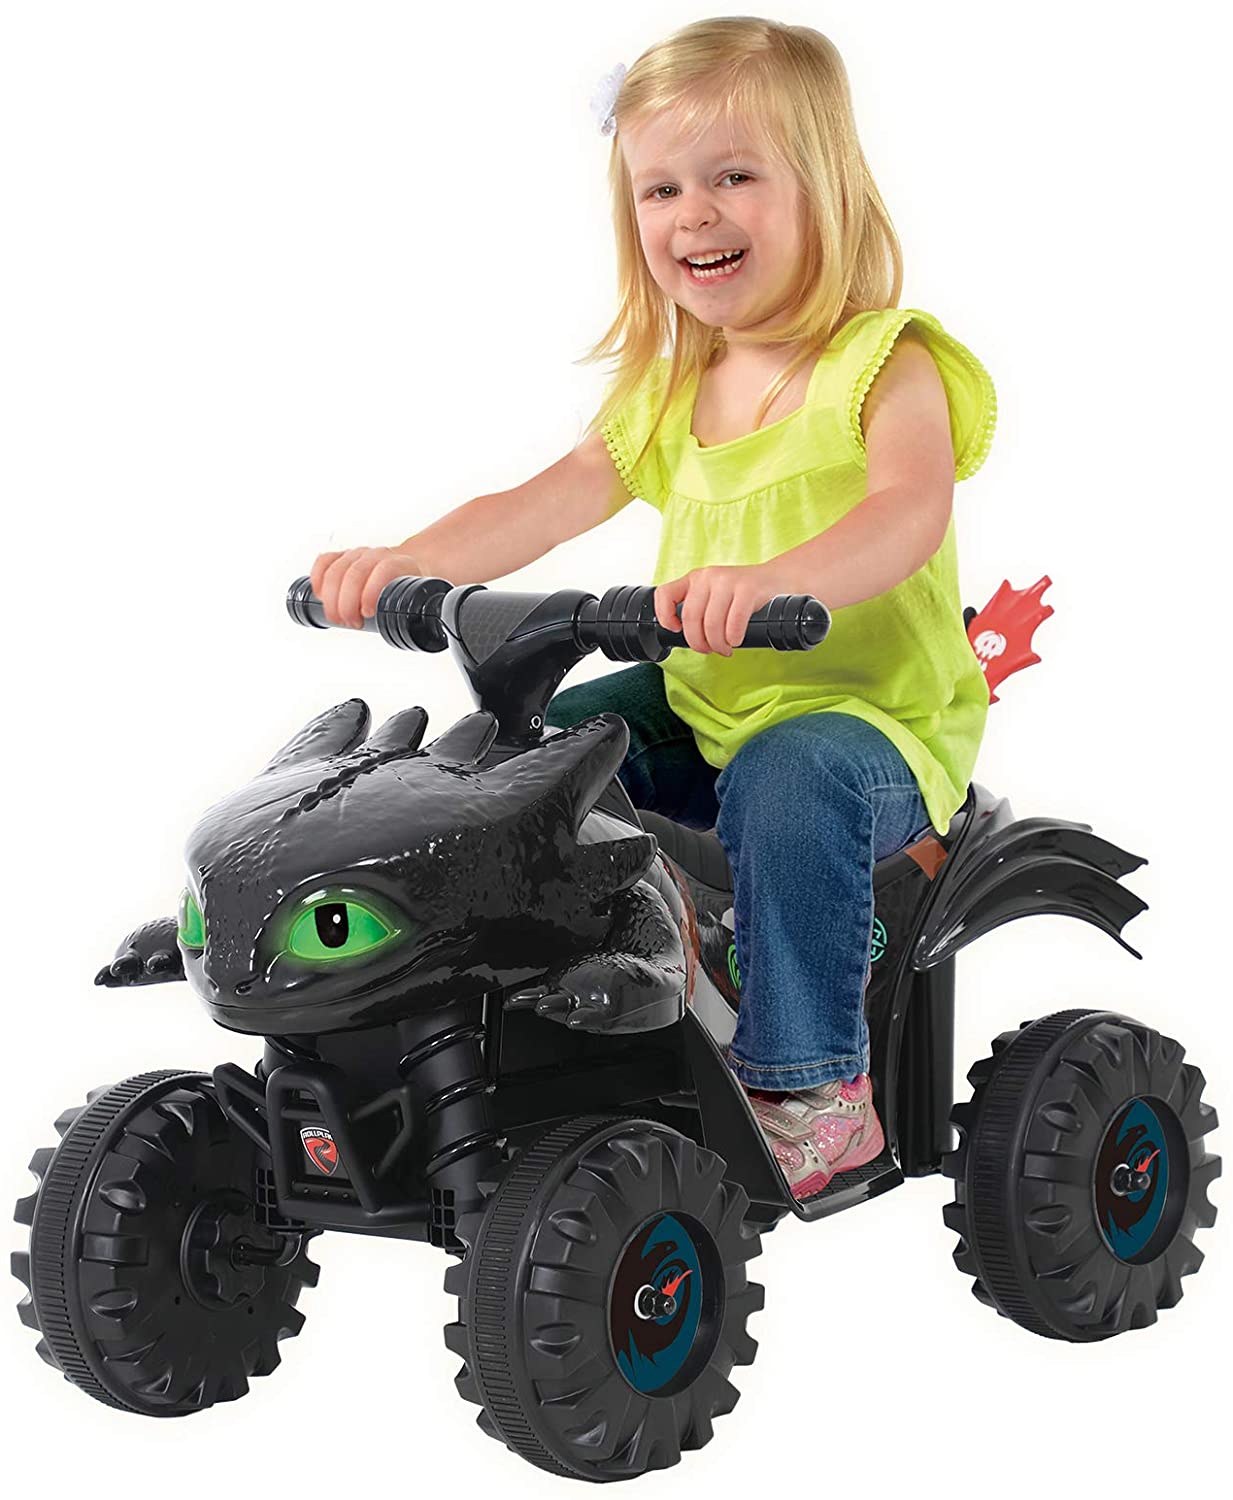 Rollplay 6V How to Train Your Dragon Mini Quad Ride On Toy, Battery-Powered Kid's Ride On